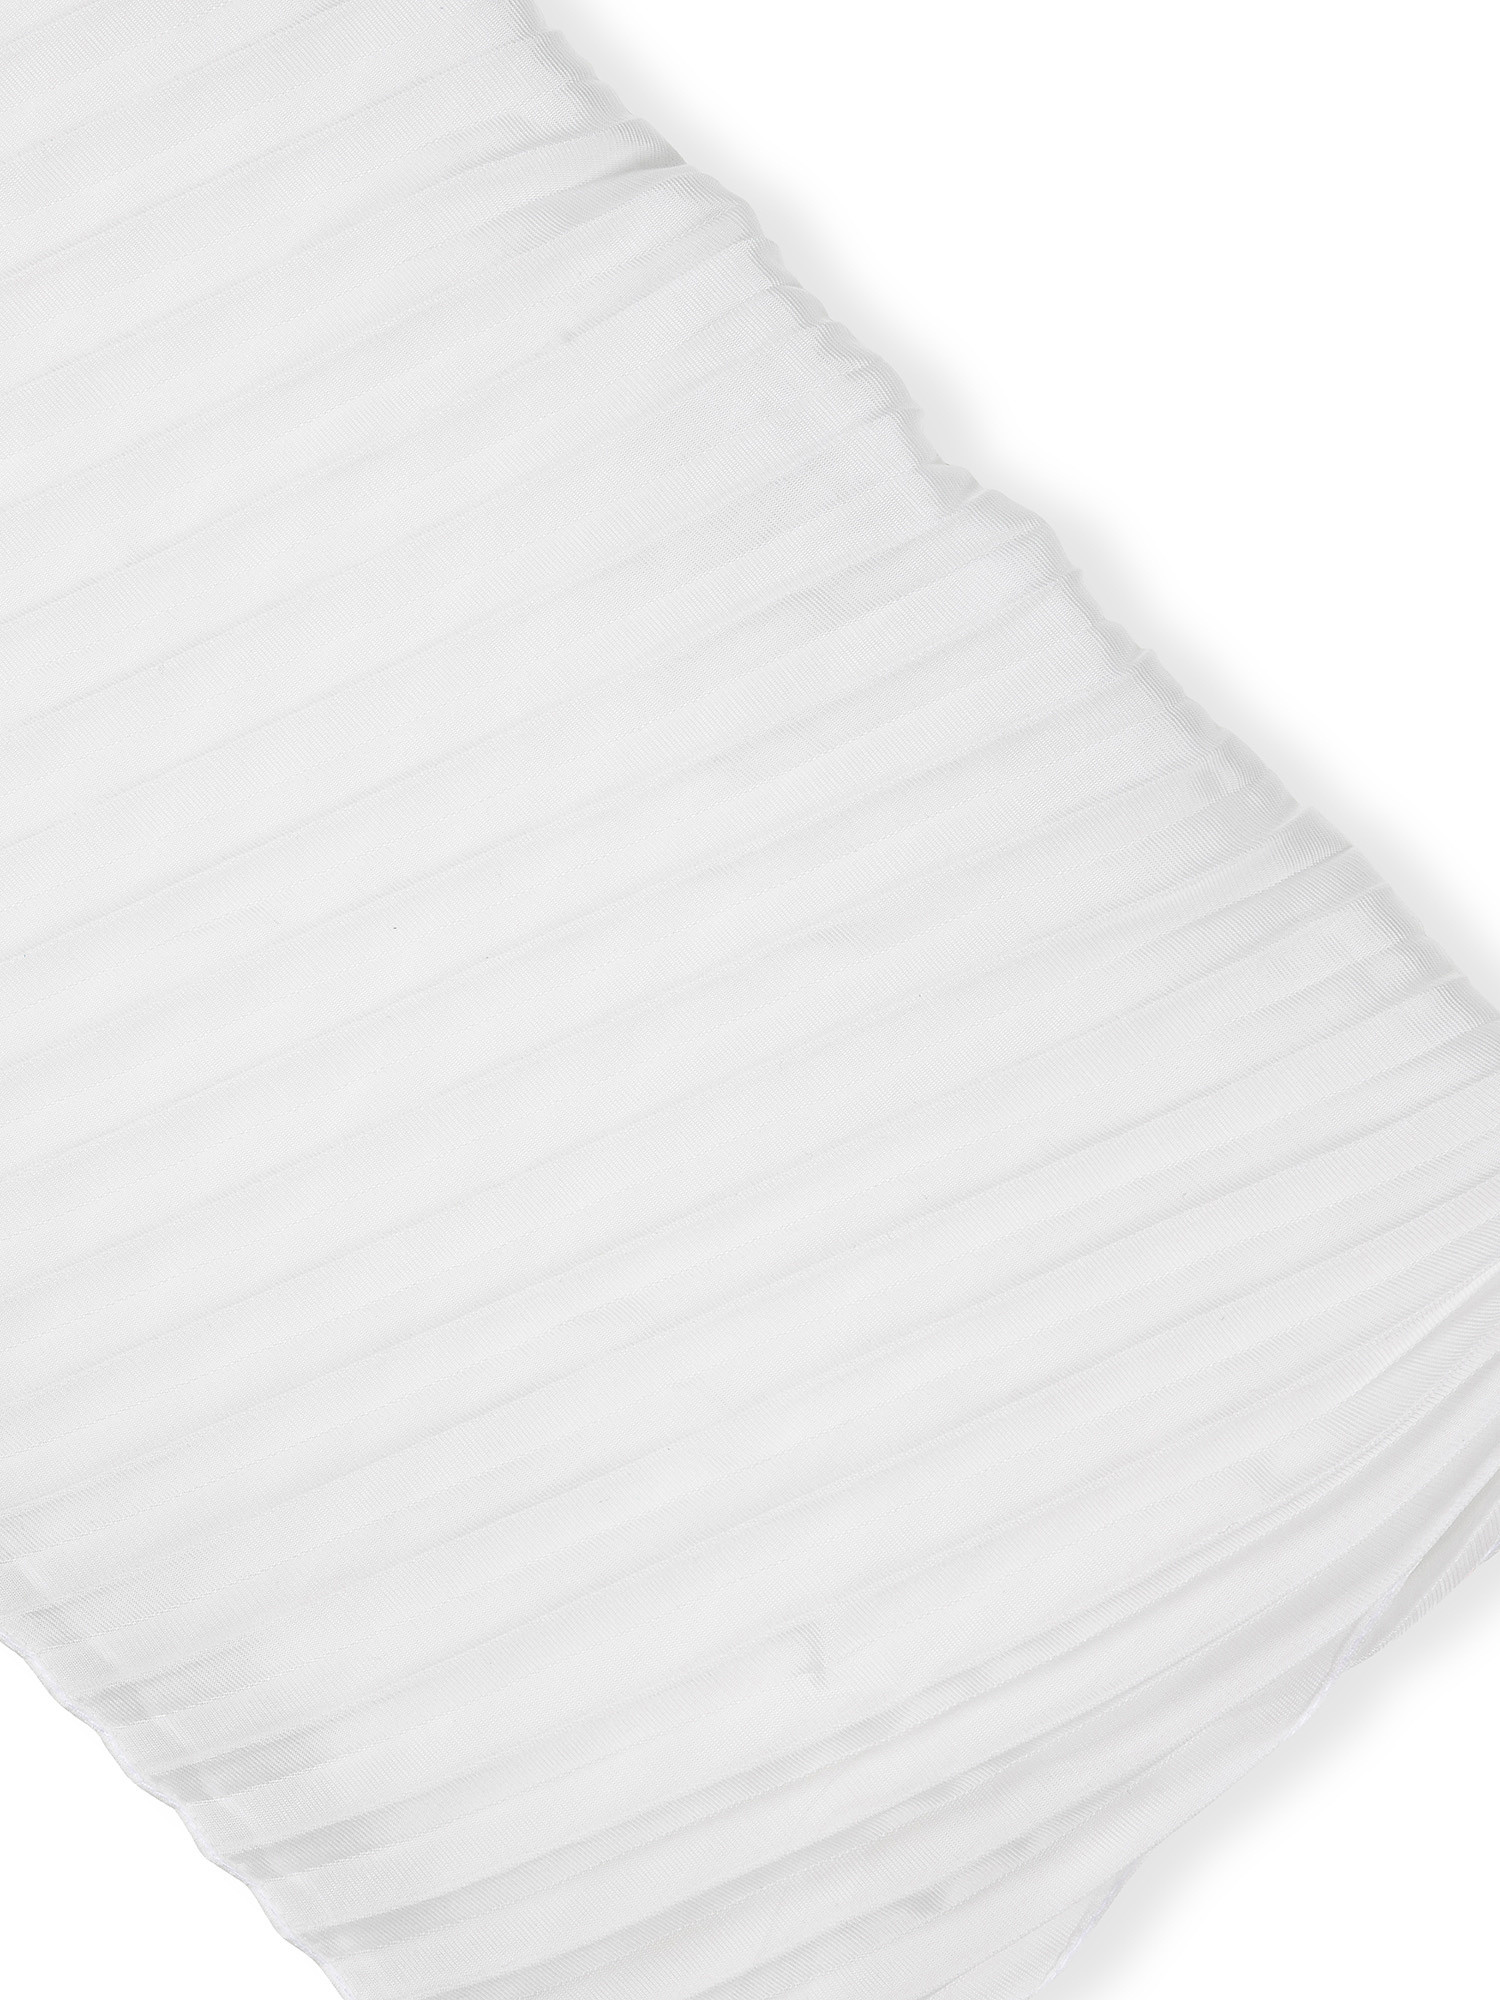 Emporio Armani - Lightweight pleated scarf, White, large image number 1